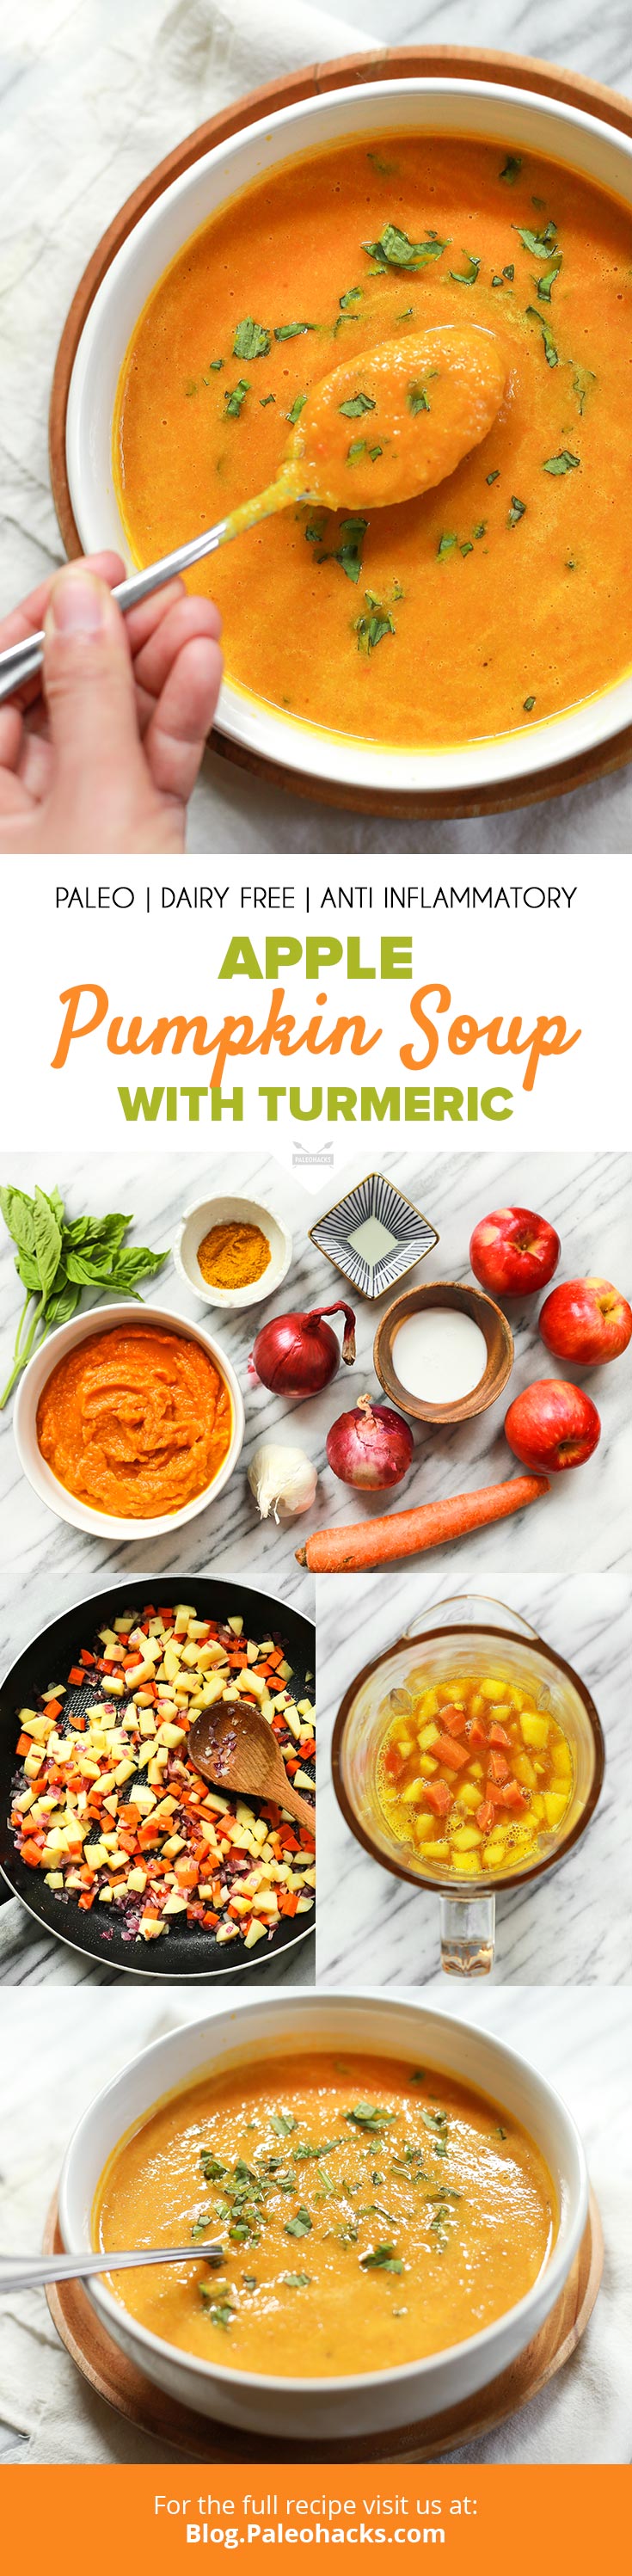 Blend up this sweet and savory apple pumpkin soup to warm you up from the inside out.